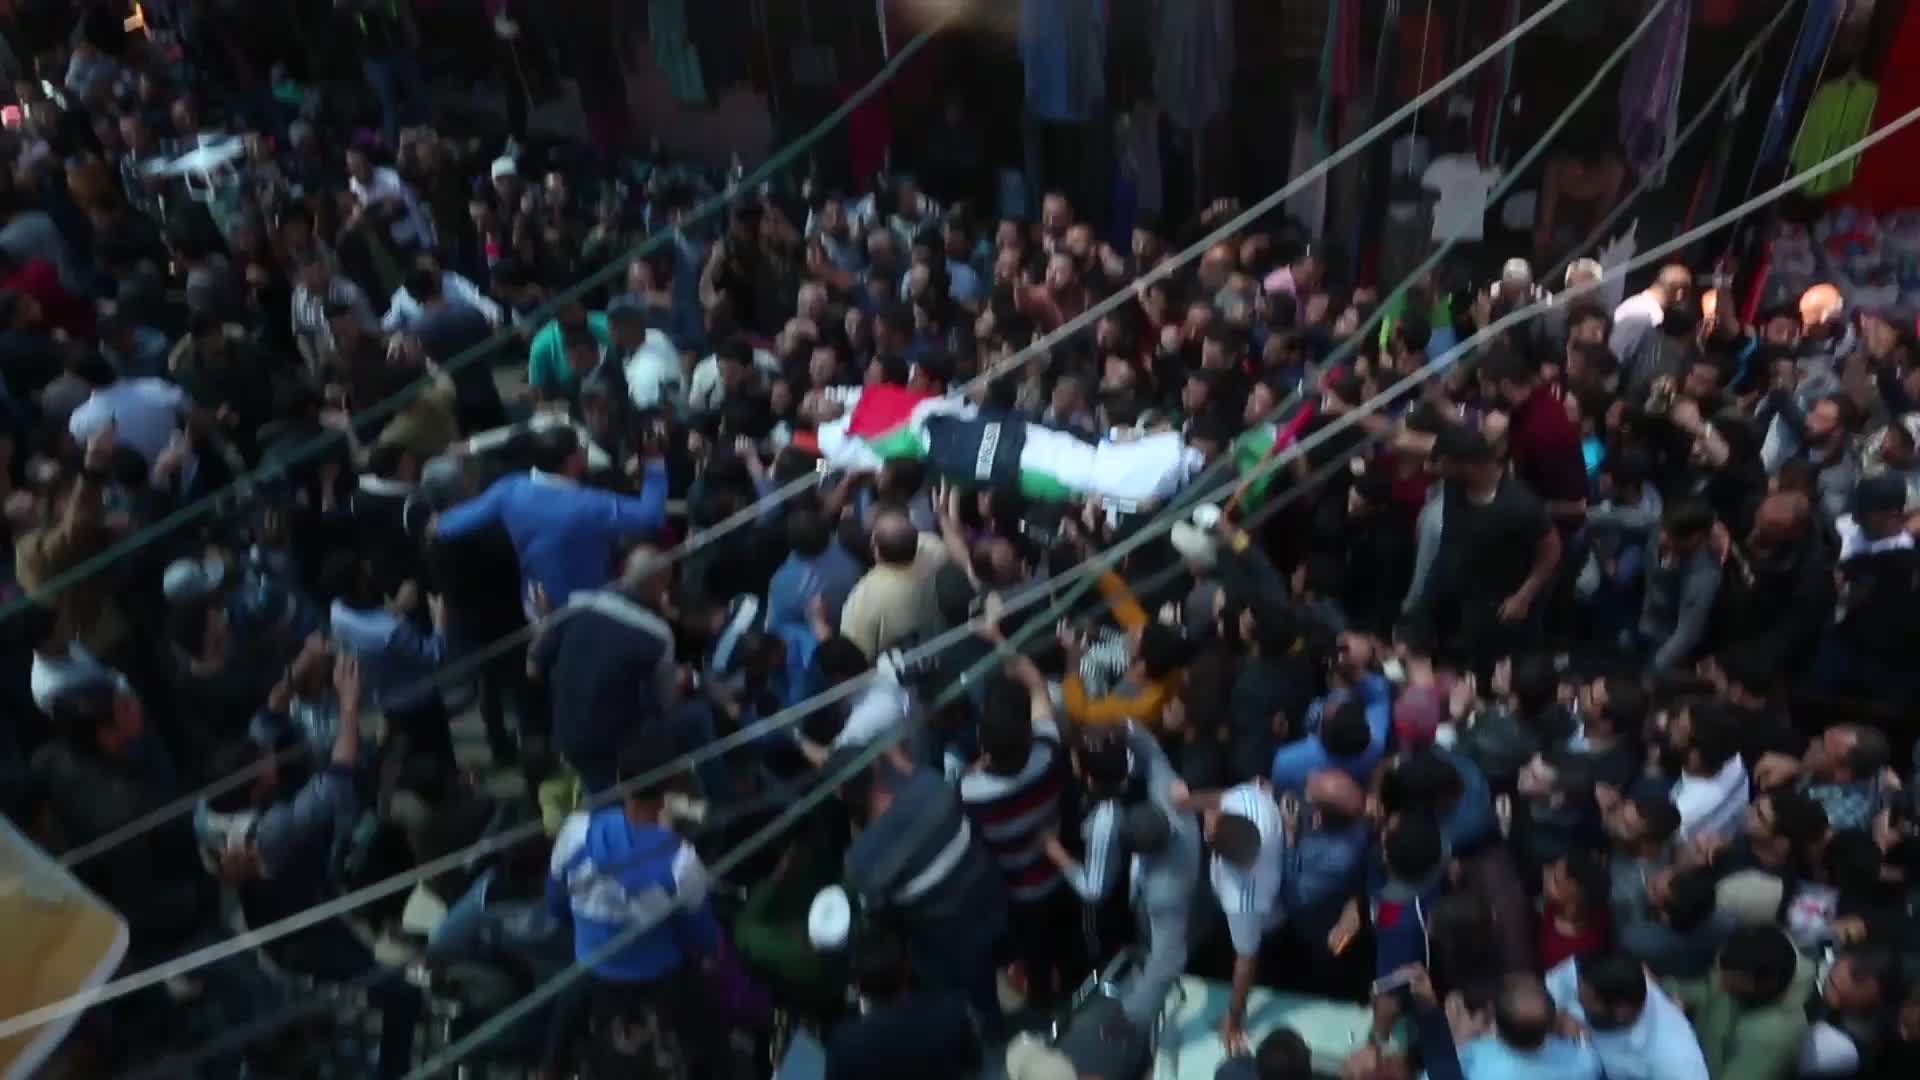 Gaza buries Palestinian journalist killed while covering mass border protest